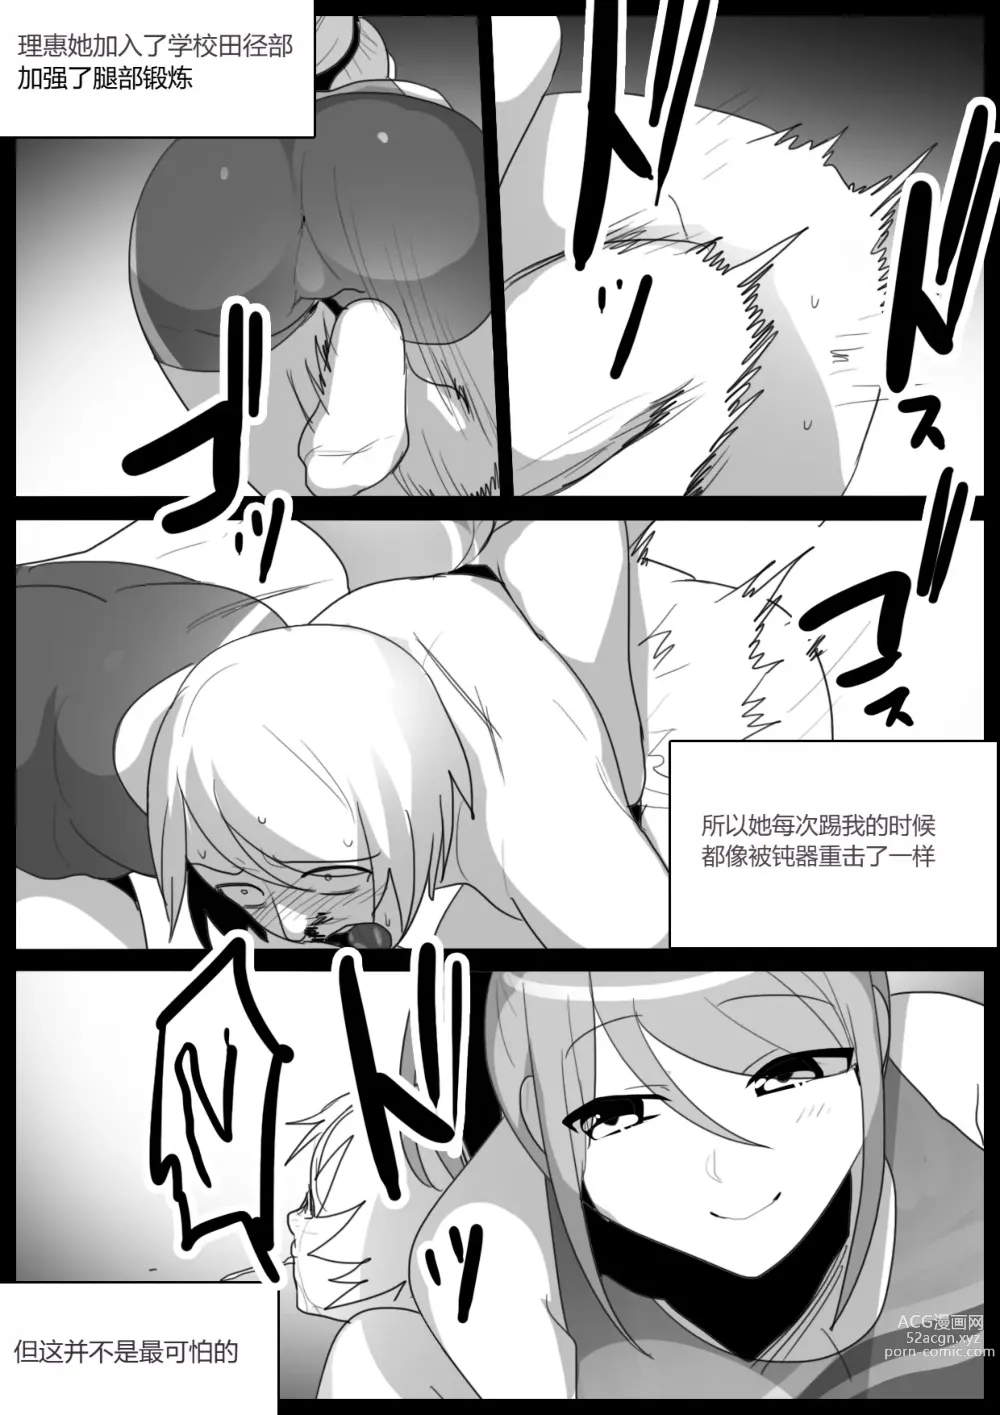 Page 7 of doujinshi Spin-Off of Girls Beat by Rie